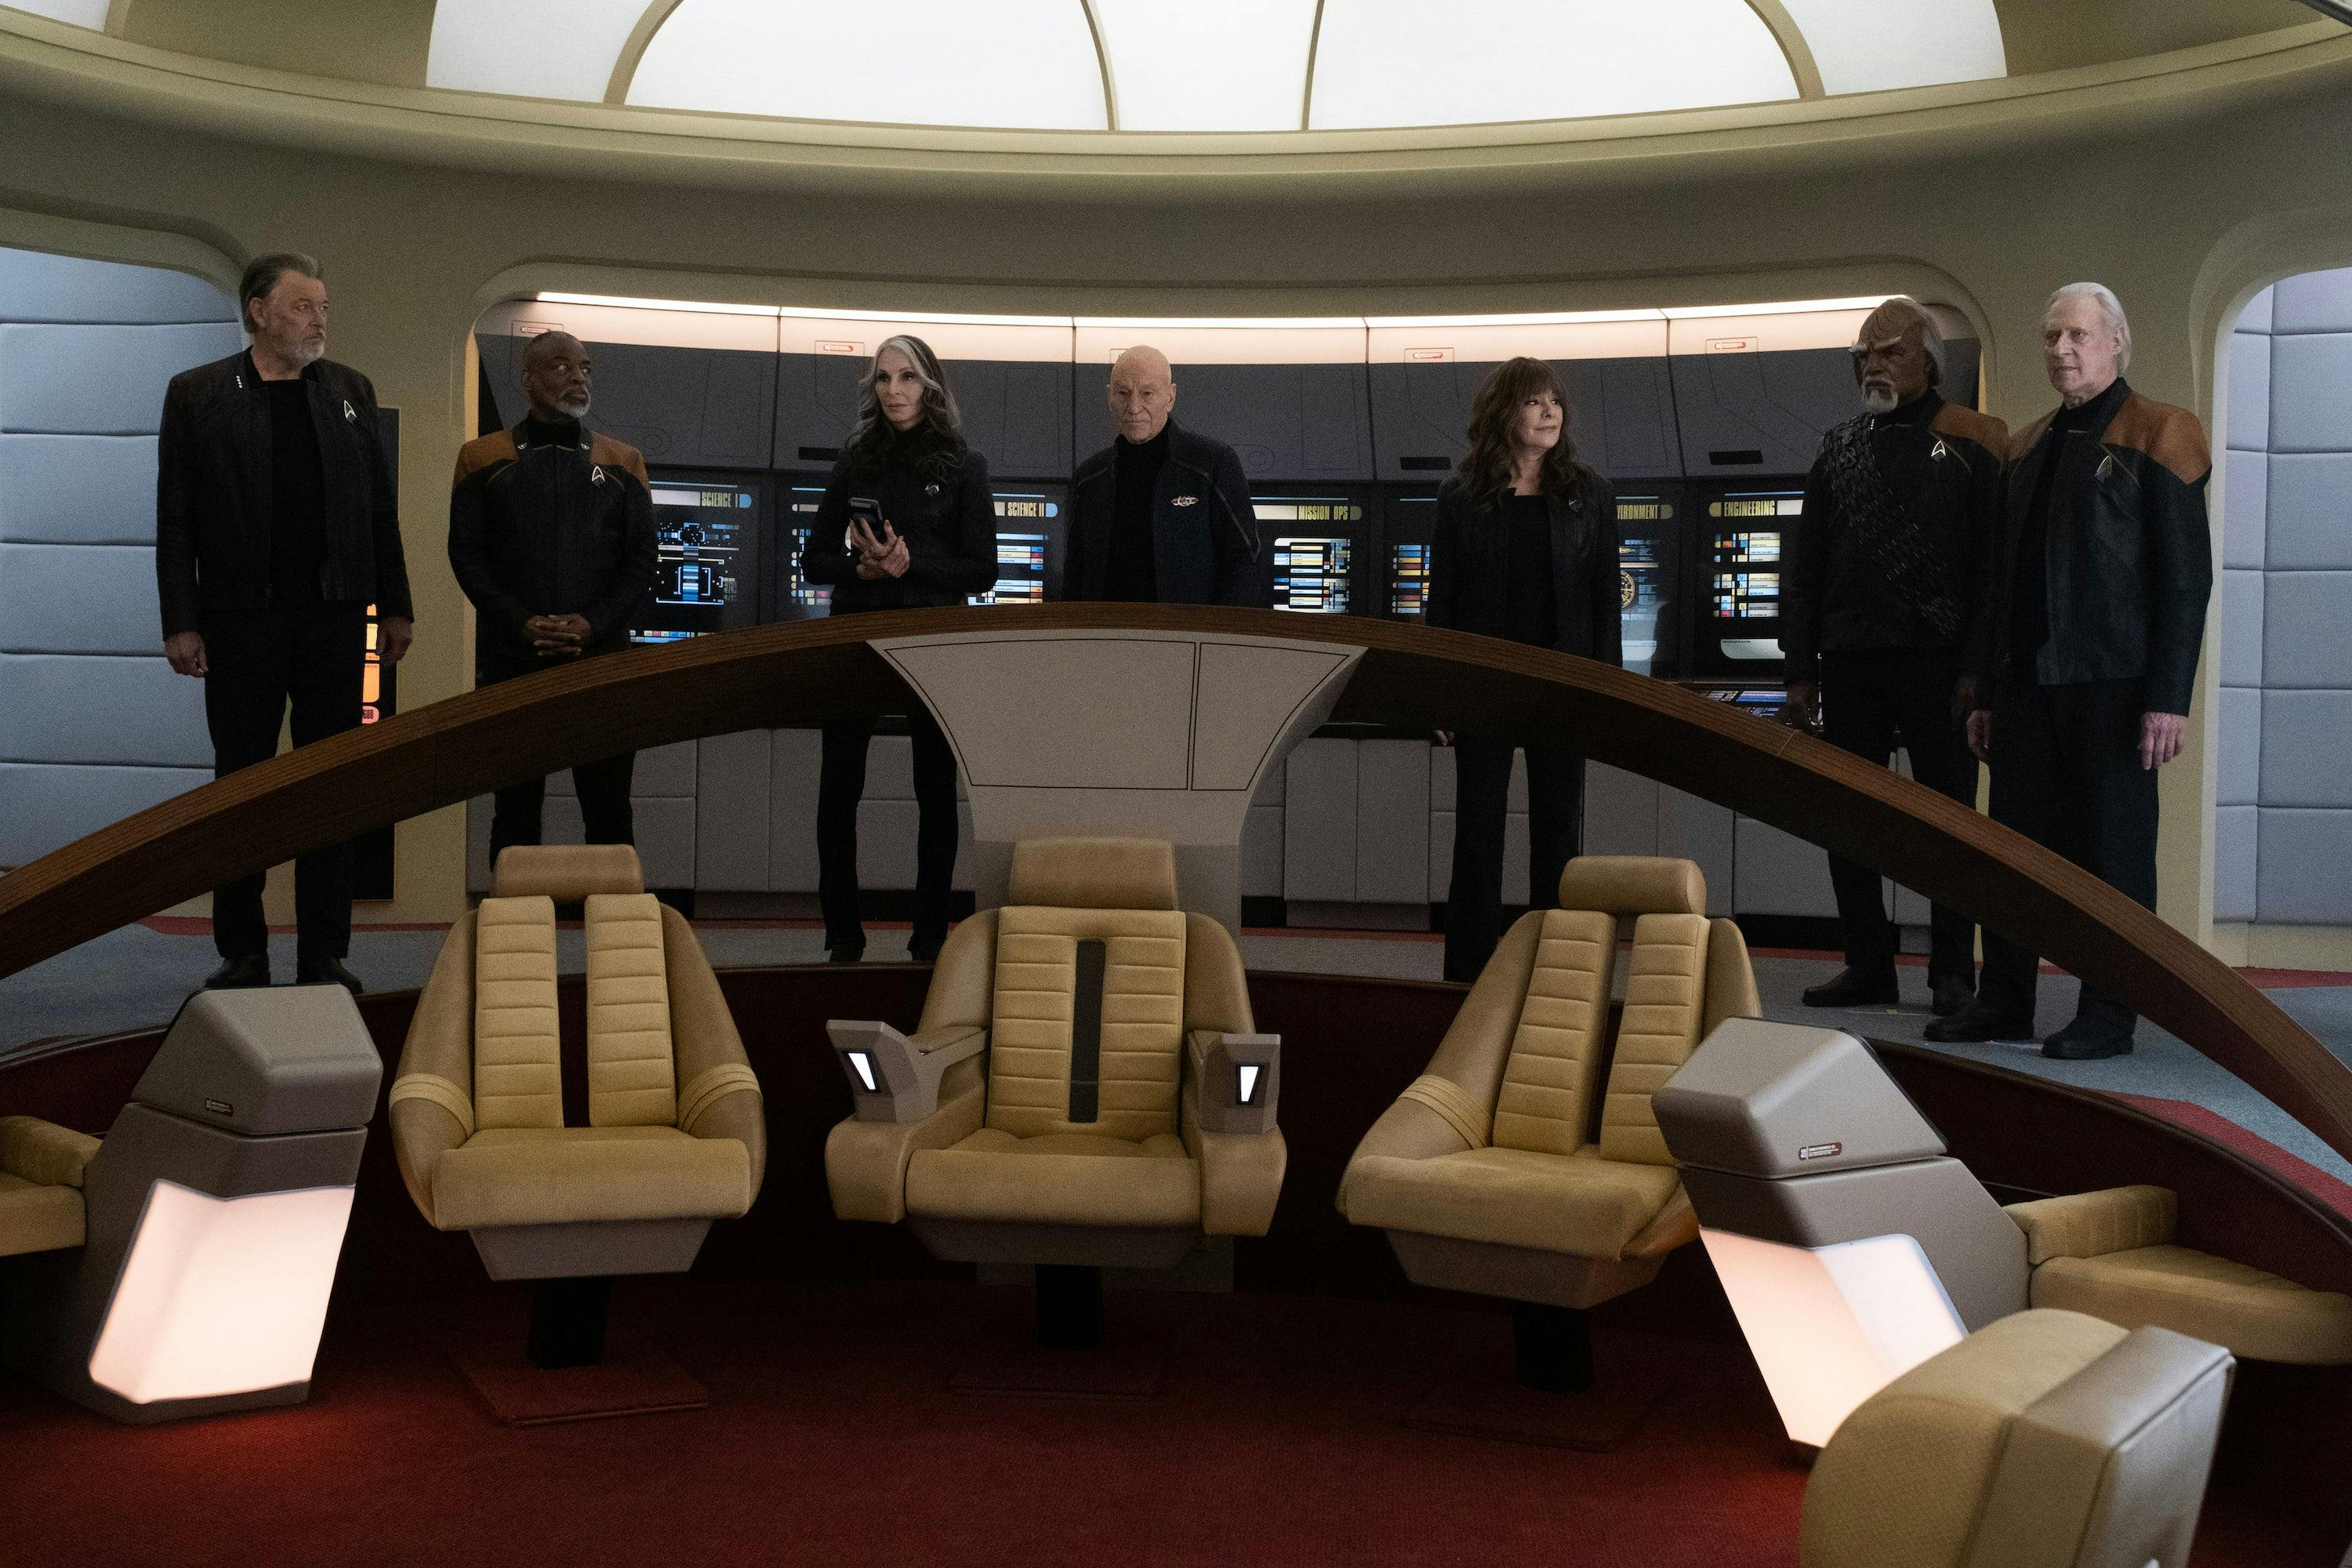 Riker, Geordi, Beverly, Picard, Deanna, Worf, and Data stand on the Bridge of the reconstructed Enterprise-D in 'Vox'